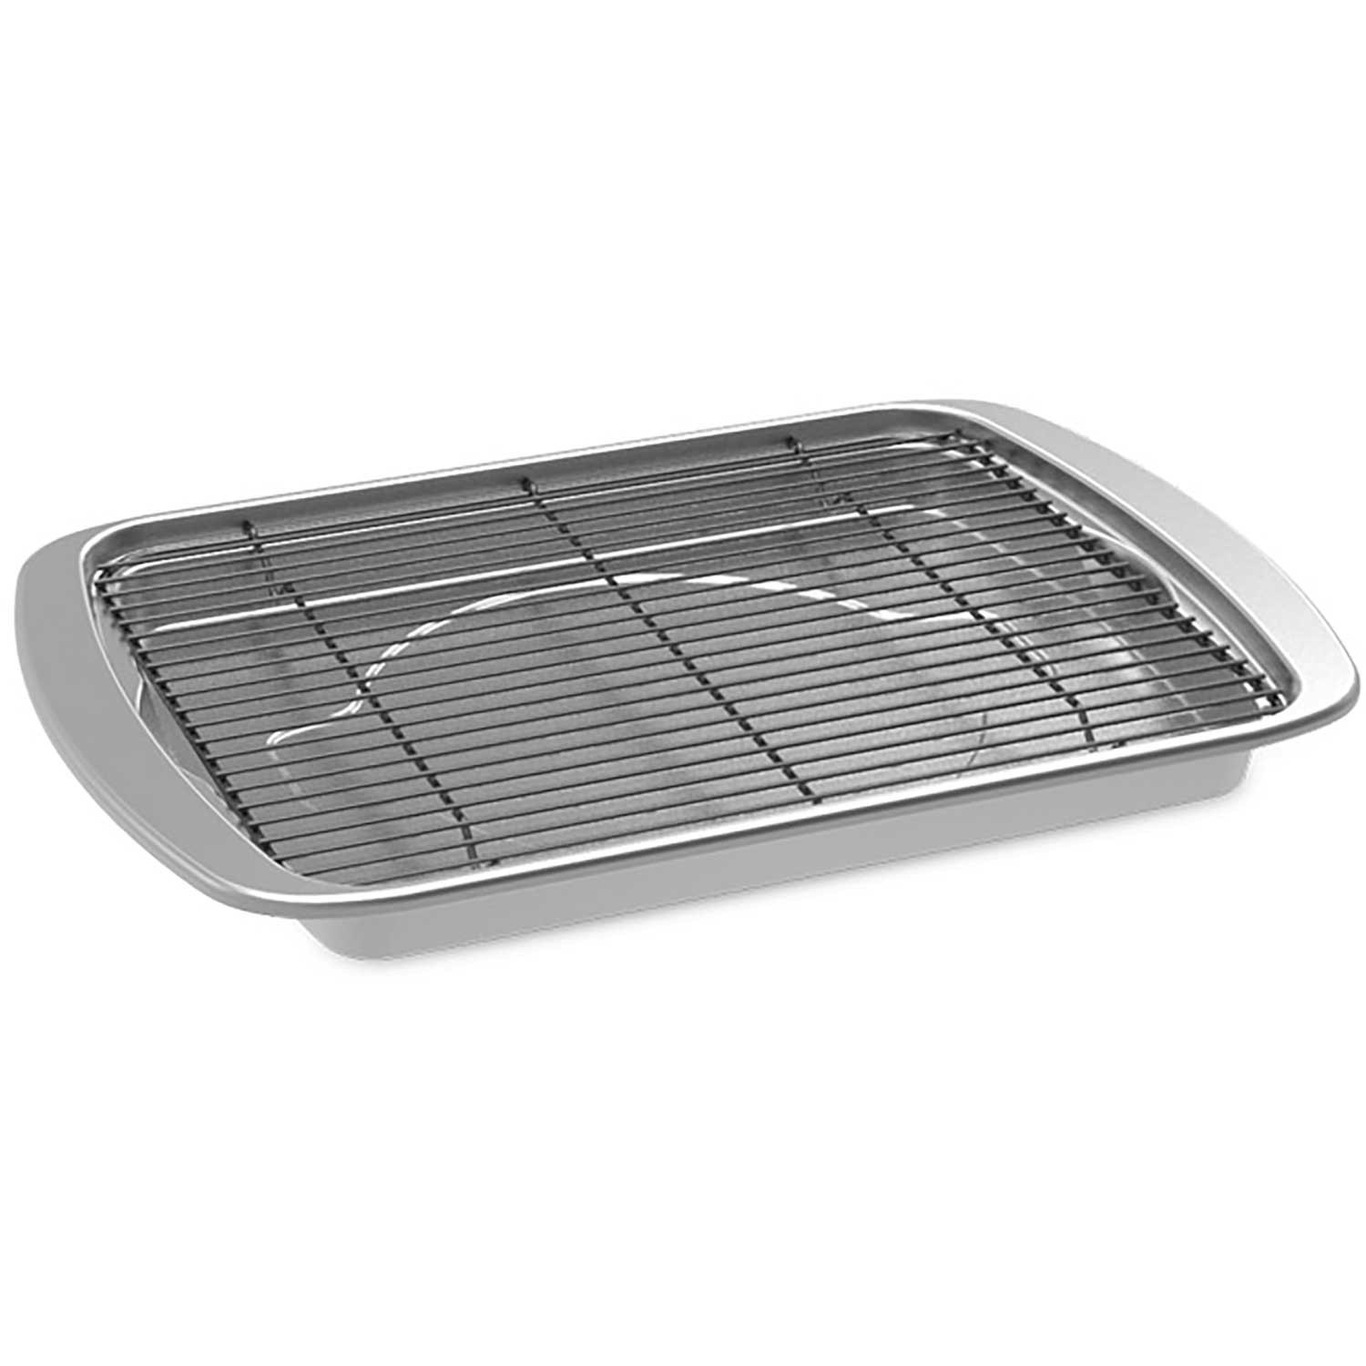 https://royaldesign.com/image/2/nordic-ware-naturals-large-cookingtay-baking-plate-grate-0?w=800&quality=80